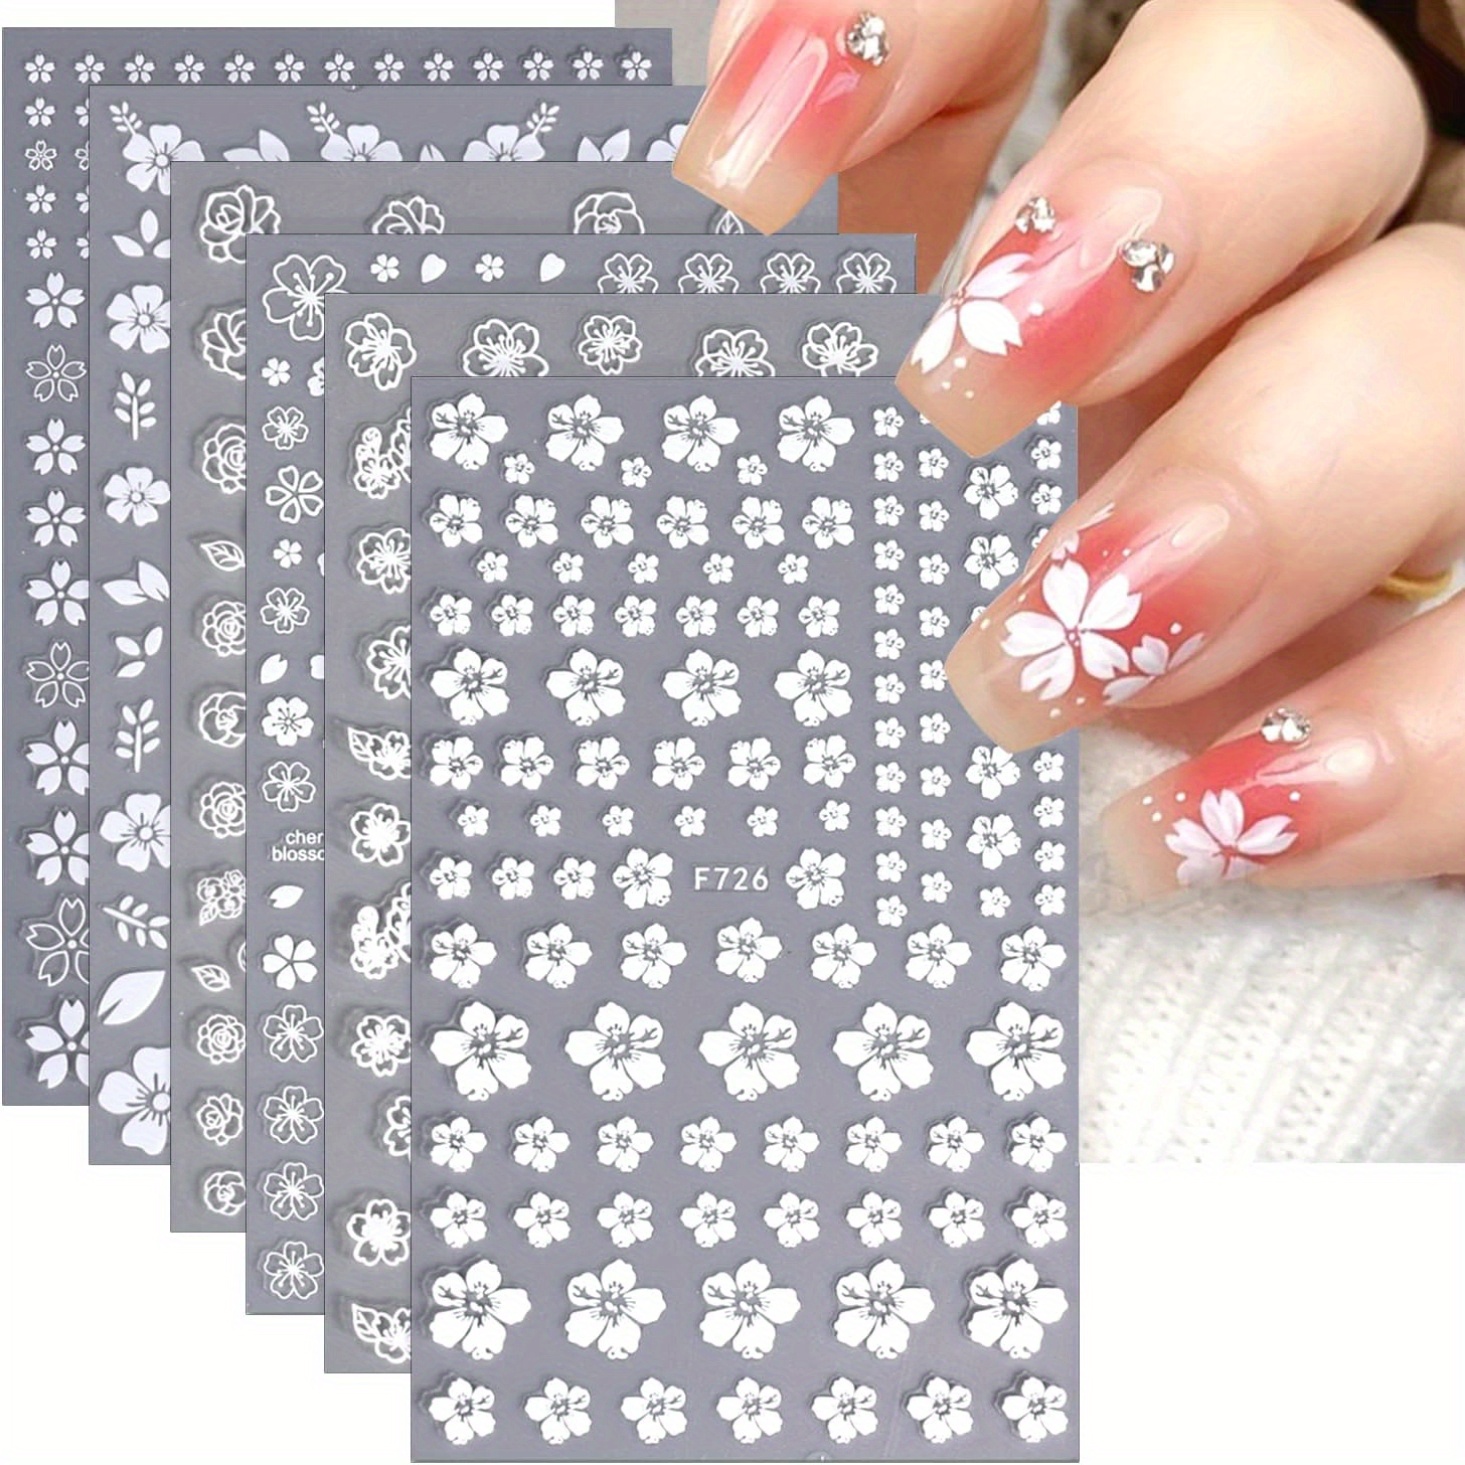 

6 Sheets White Nail Art Stickers, 3d Resin Flower Decals For Delicate Manicure, Self-adhesive Nail Supplies For Women's Nail Decoration